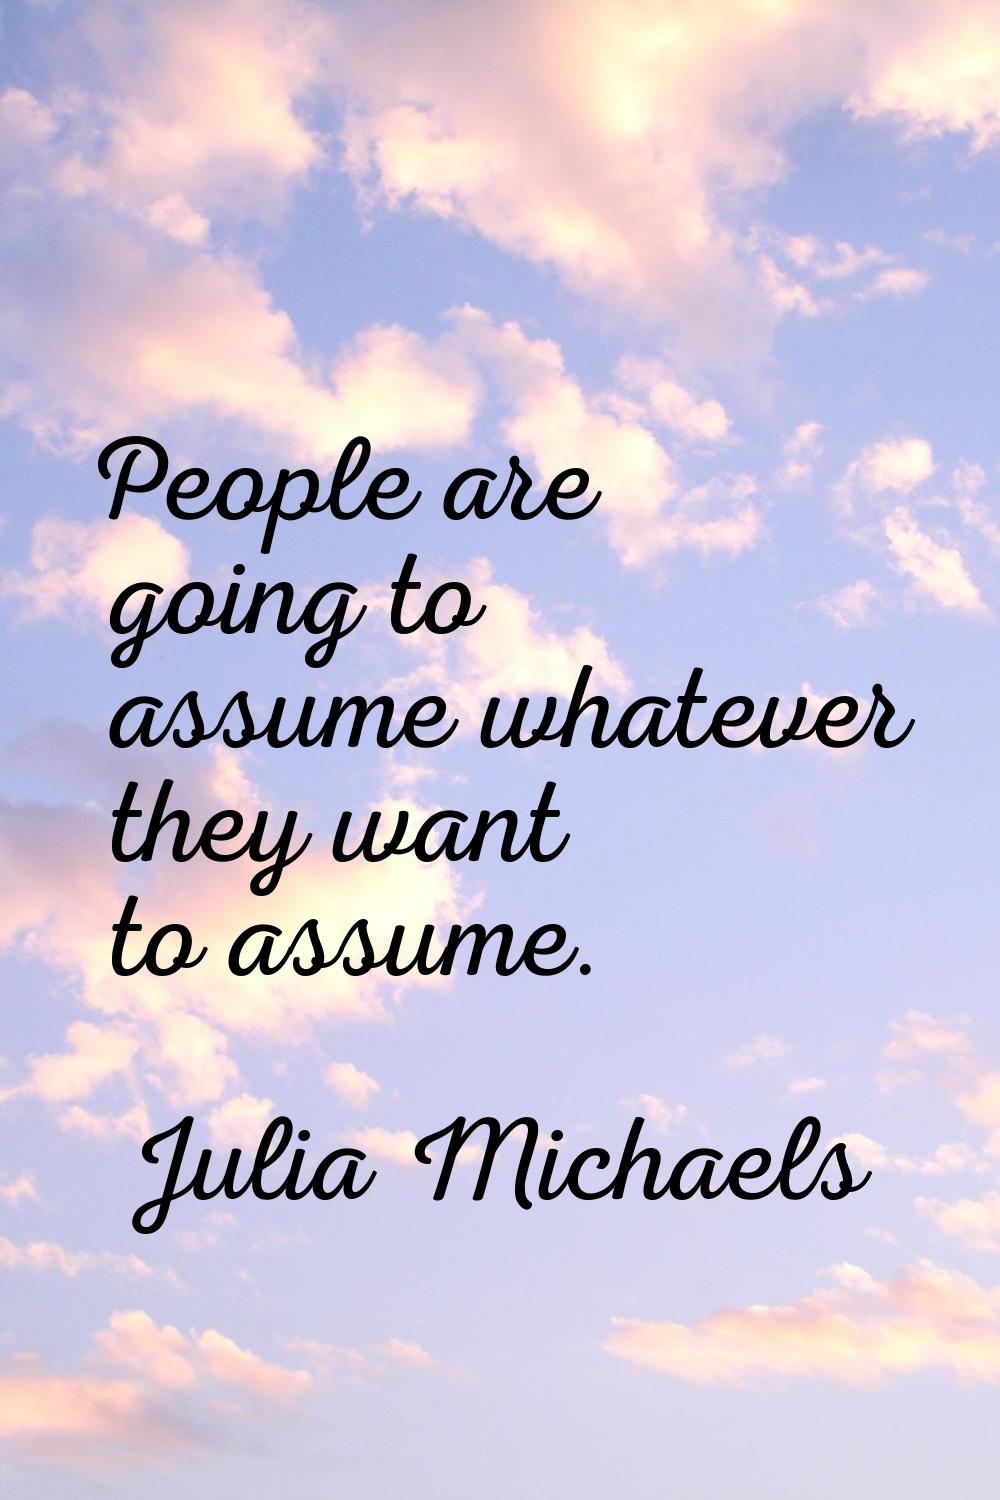 People are going to assume whatever they want to assume.